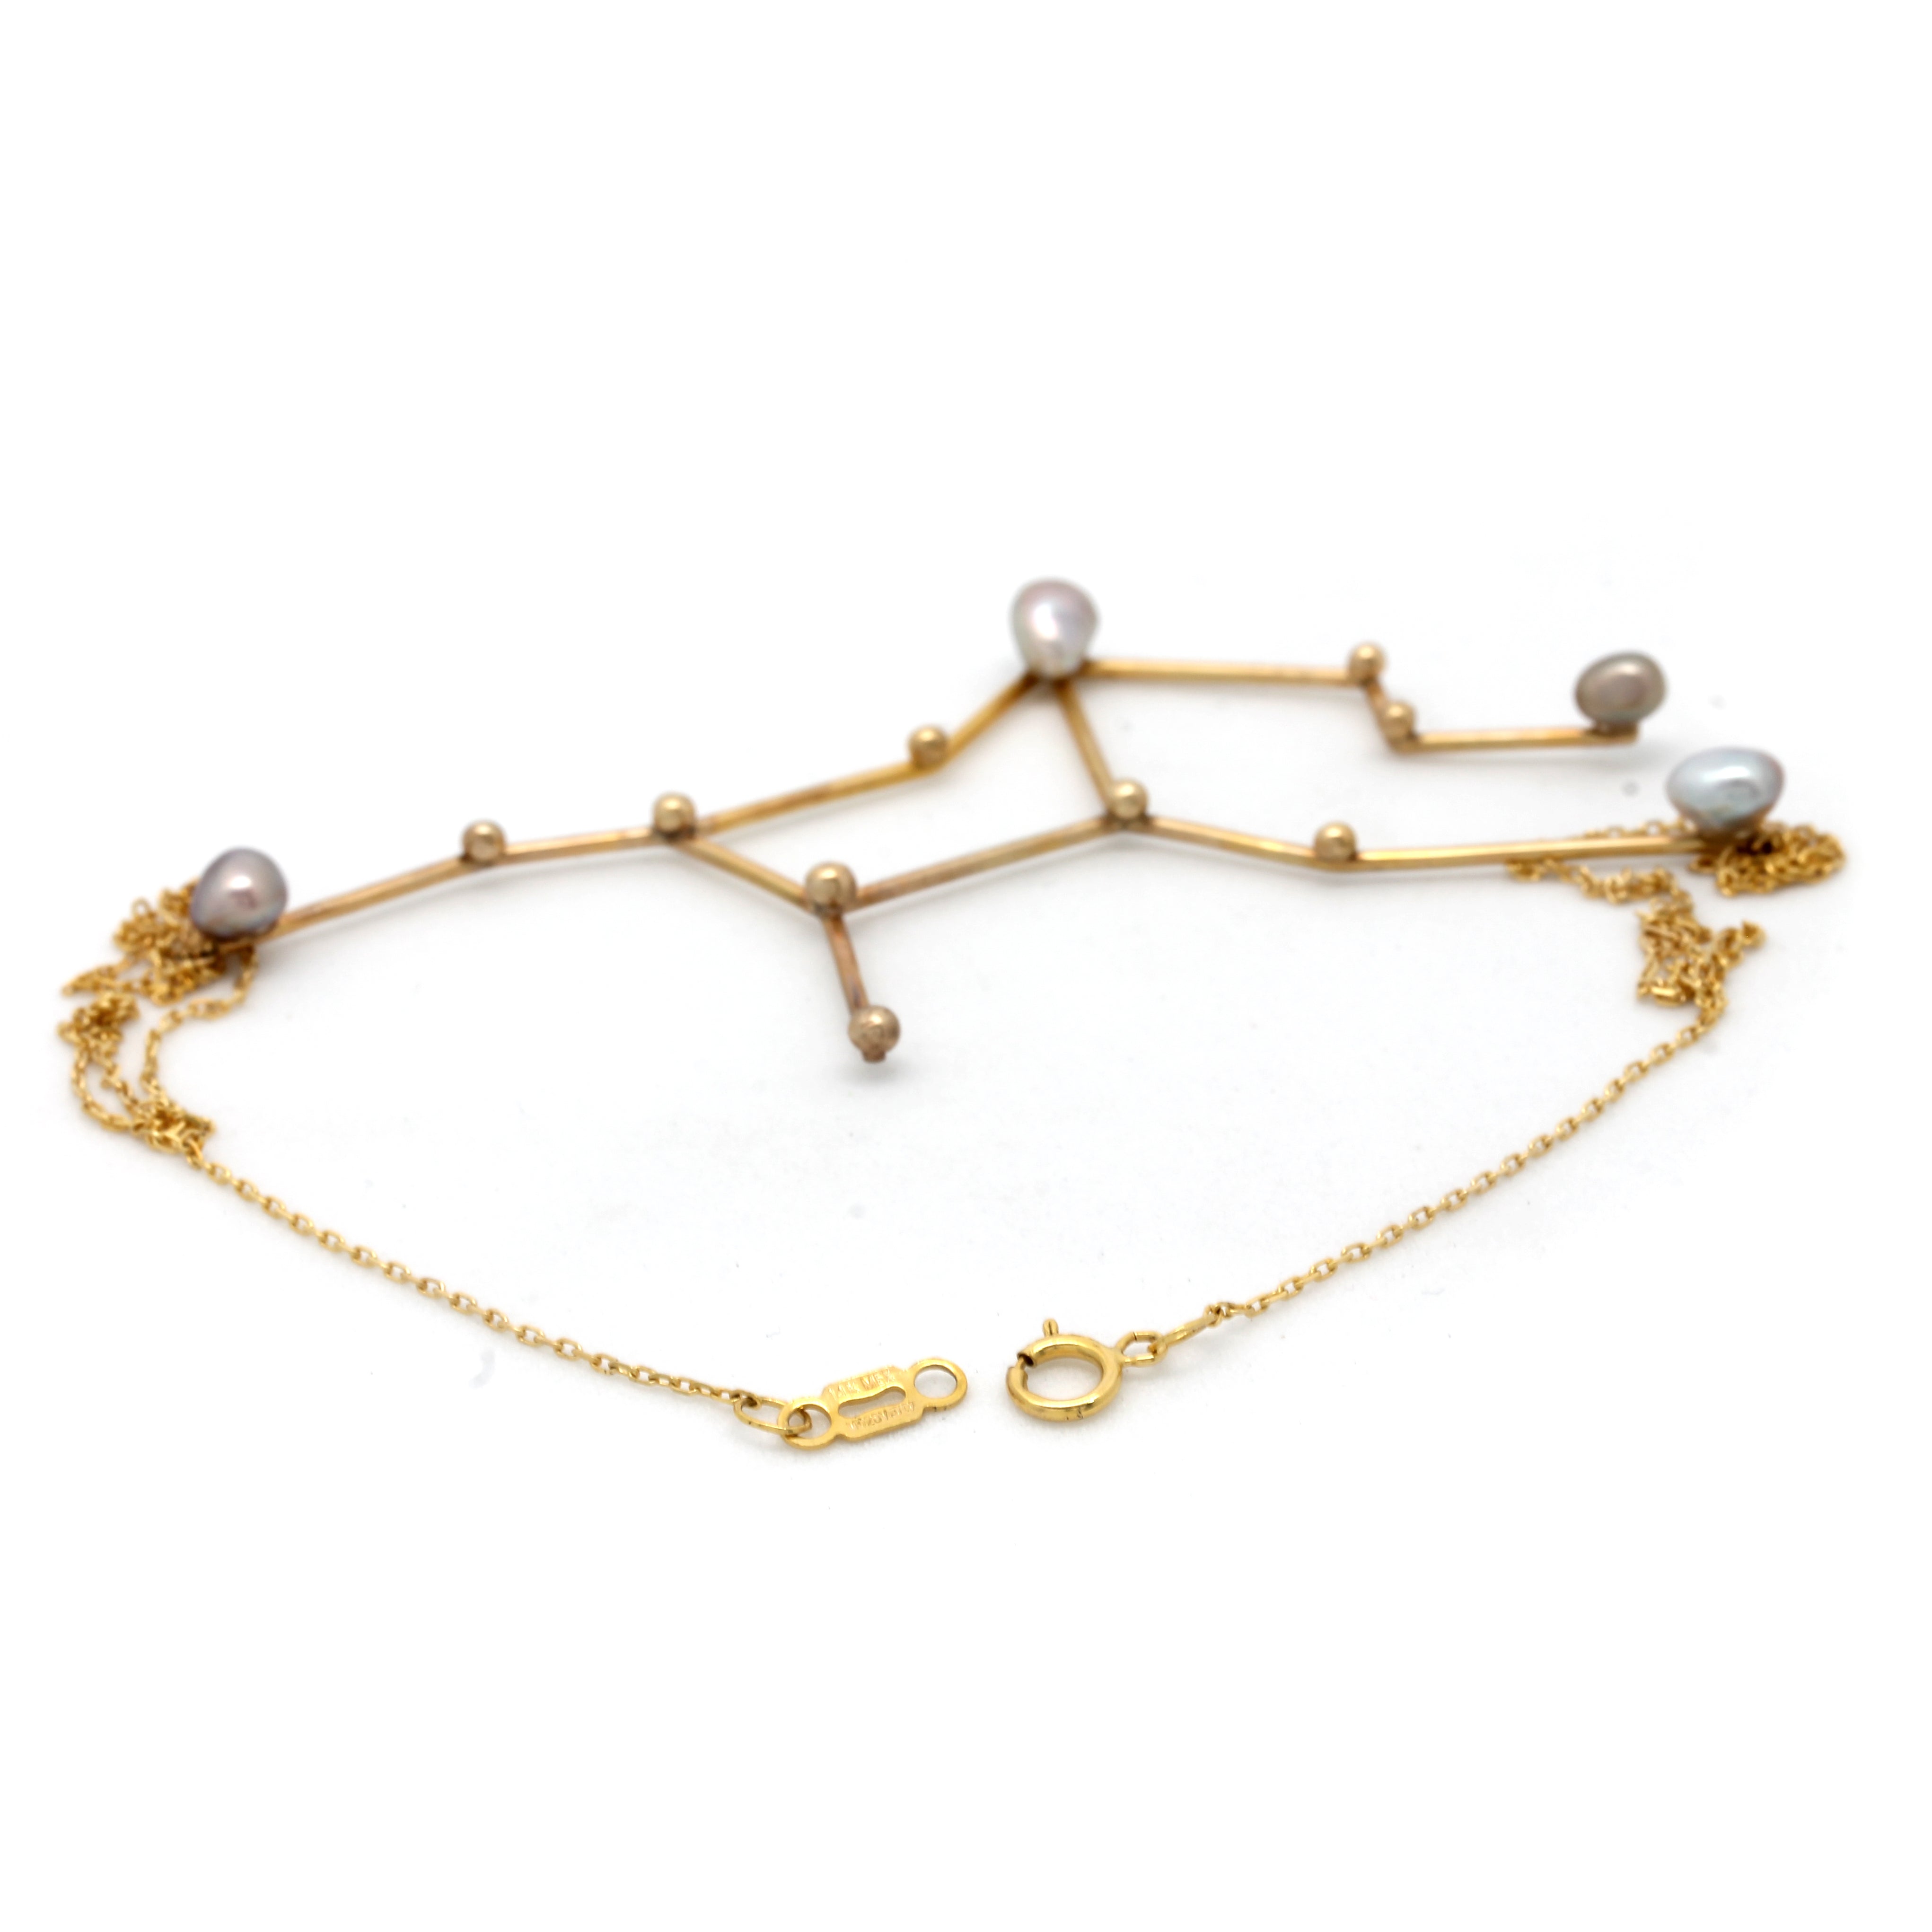 "Virgo (Aug 23th - Sep 22th)" 14K Yellow Gold Pendant and Chain with Cortez Keshi Pearls